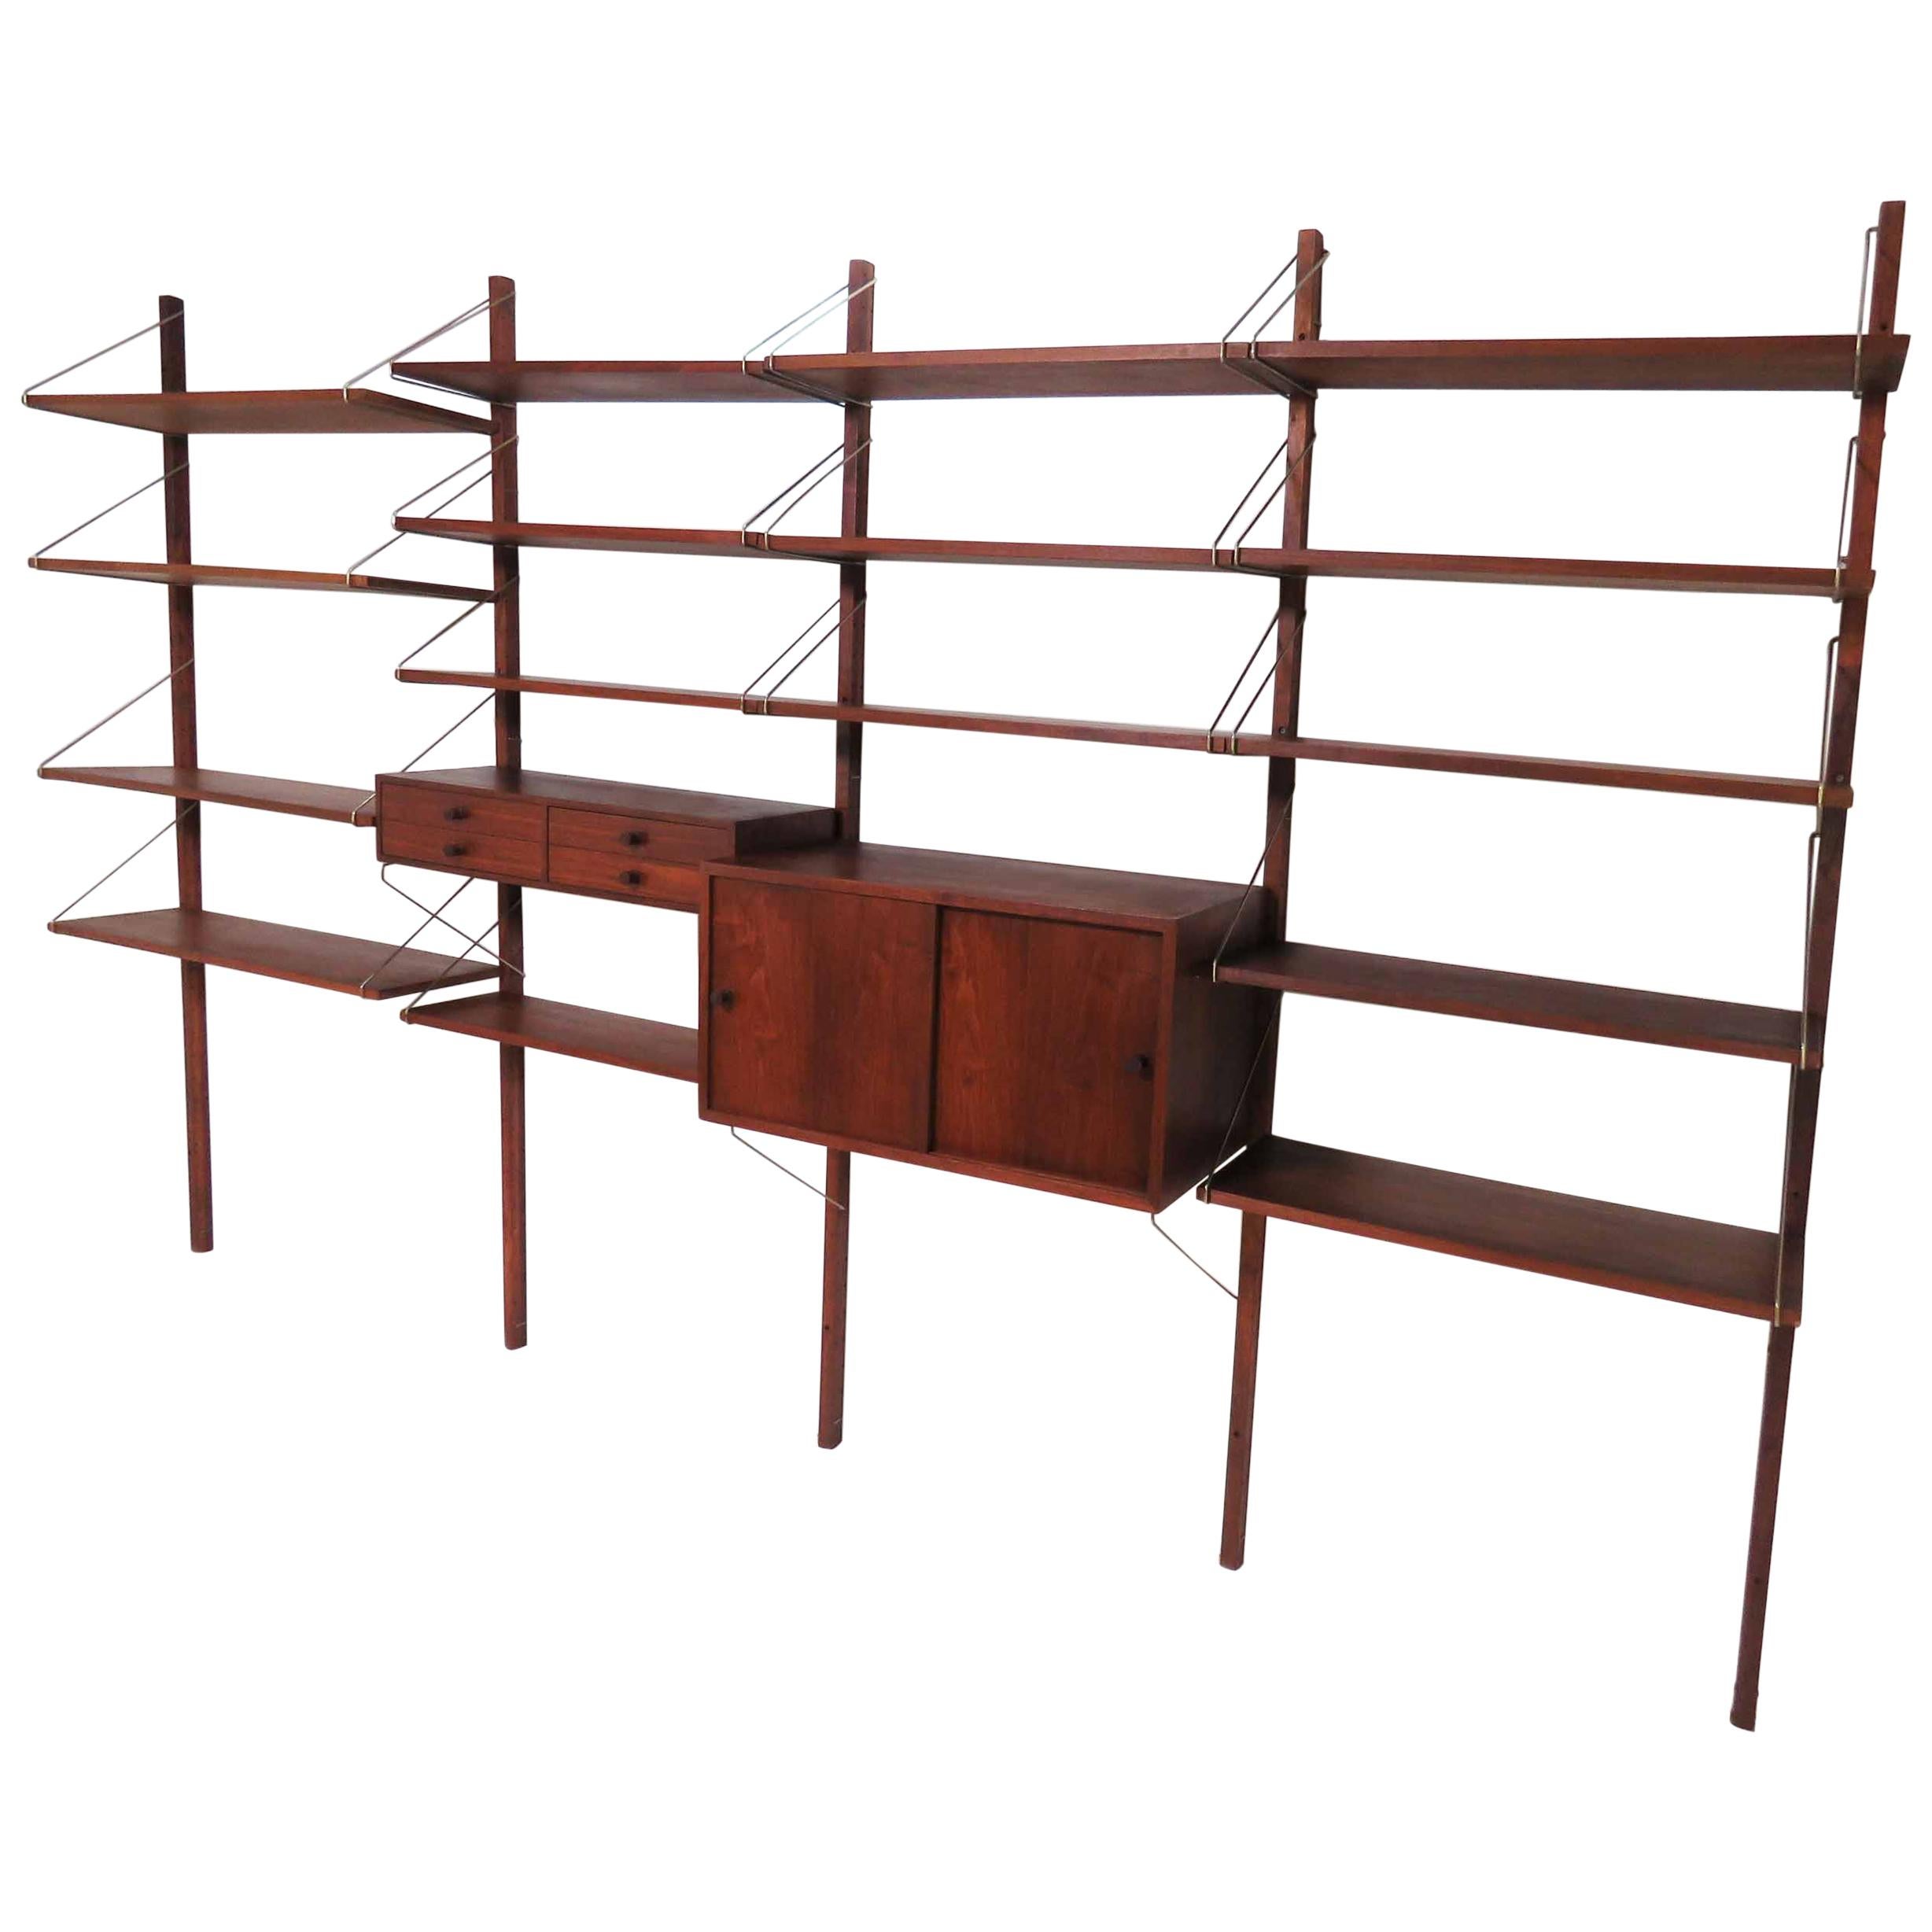 Four-Bay Midcentury "Cado" Style Wall Mounted Shelving Unit, circa 1960s